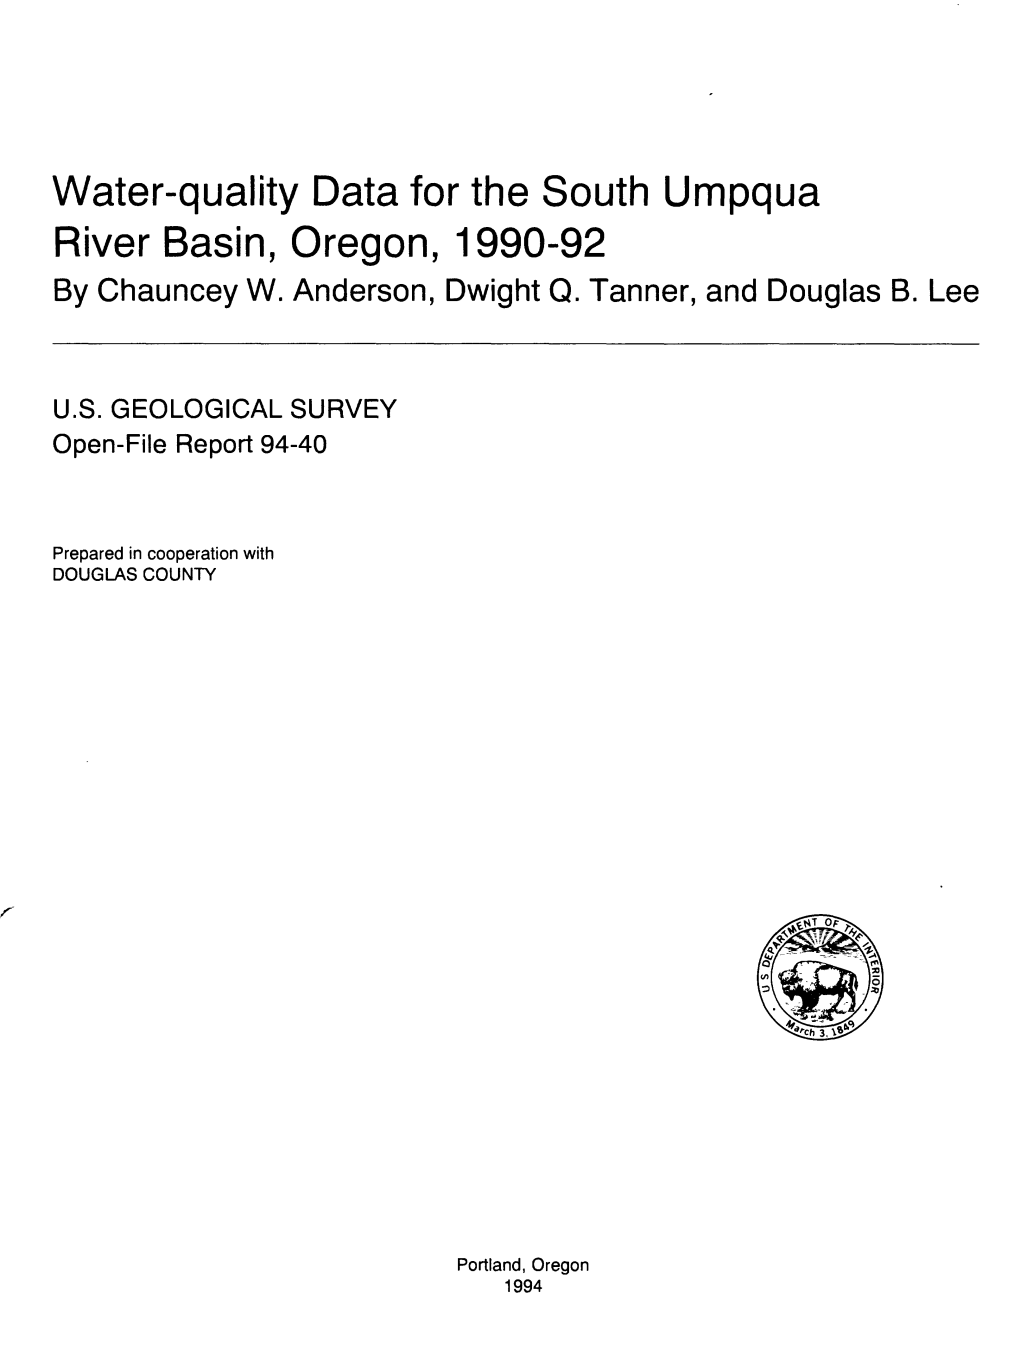 Water-Quality Data for the South Umpqua River Basin, Oregon, 1990-92 by Chauncey W